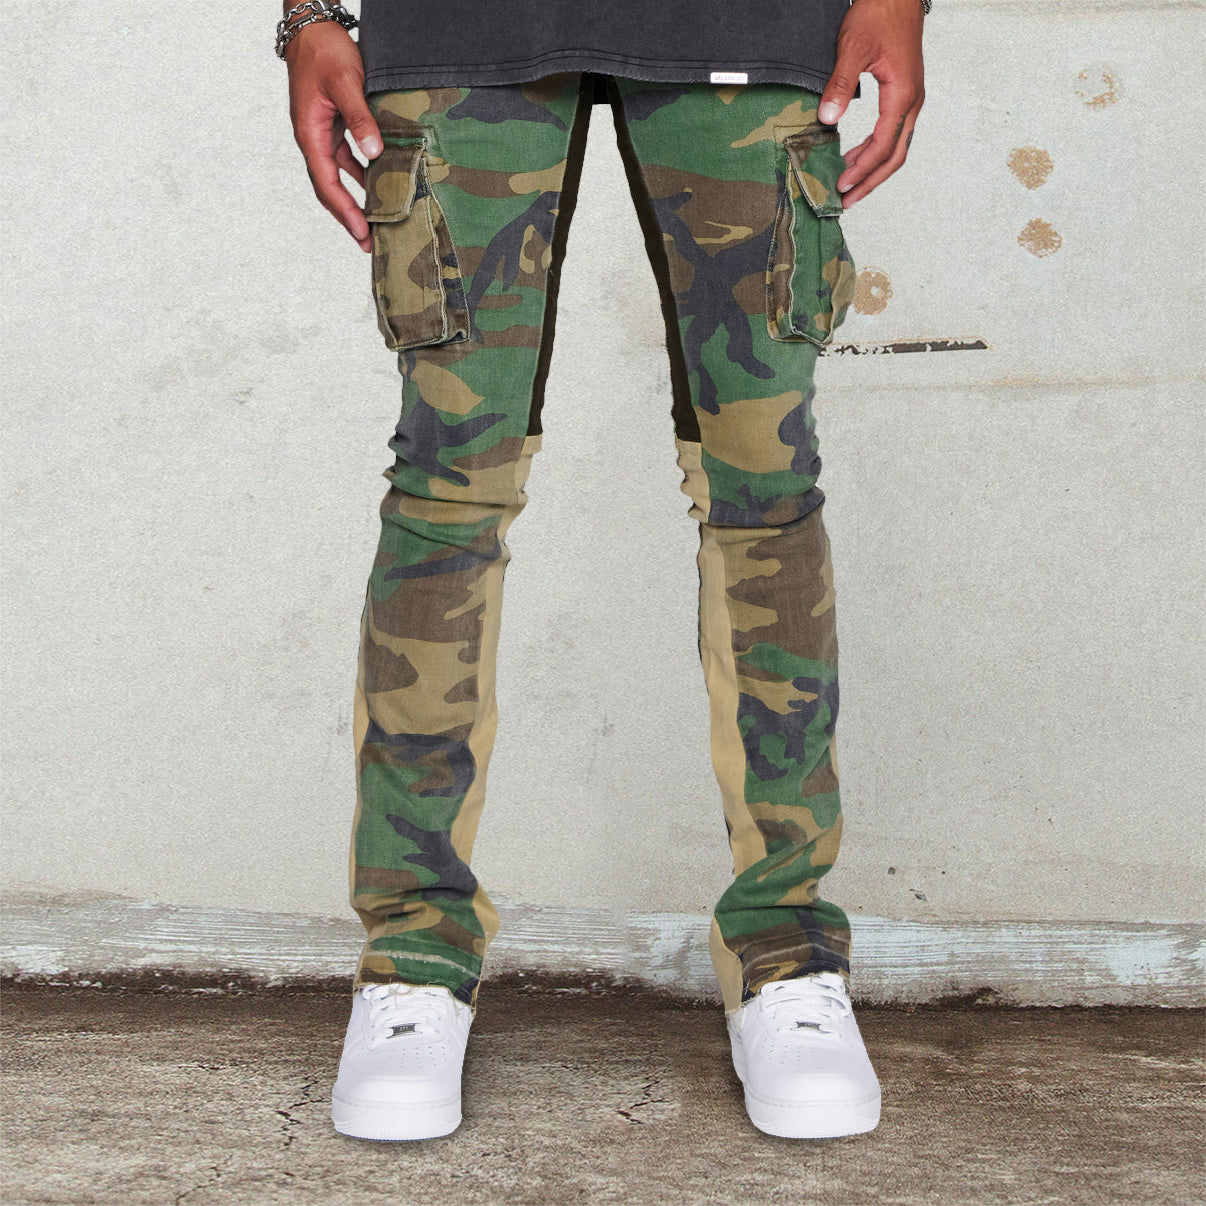 Stylish camouflage overalls stacked jeans